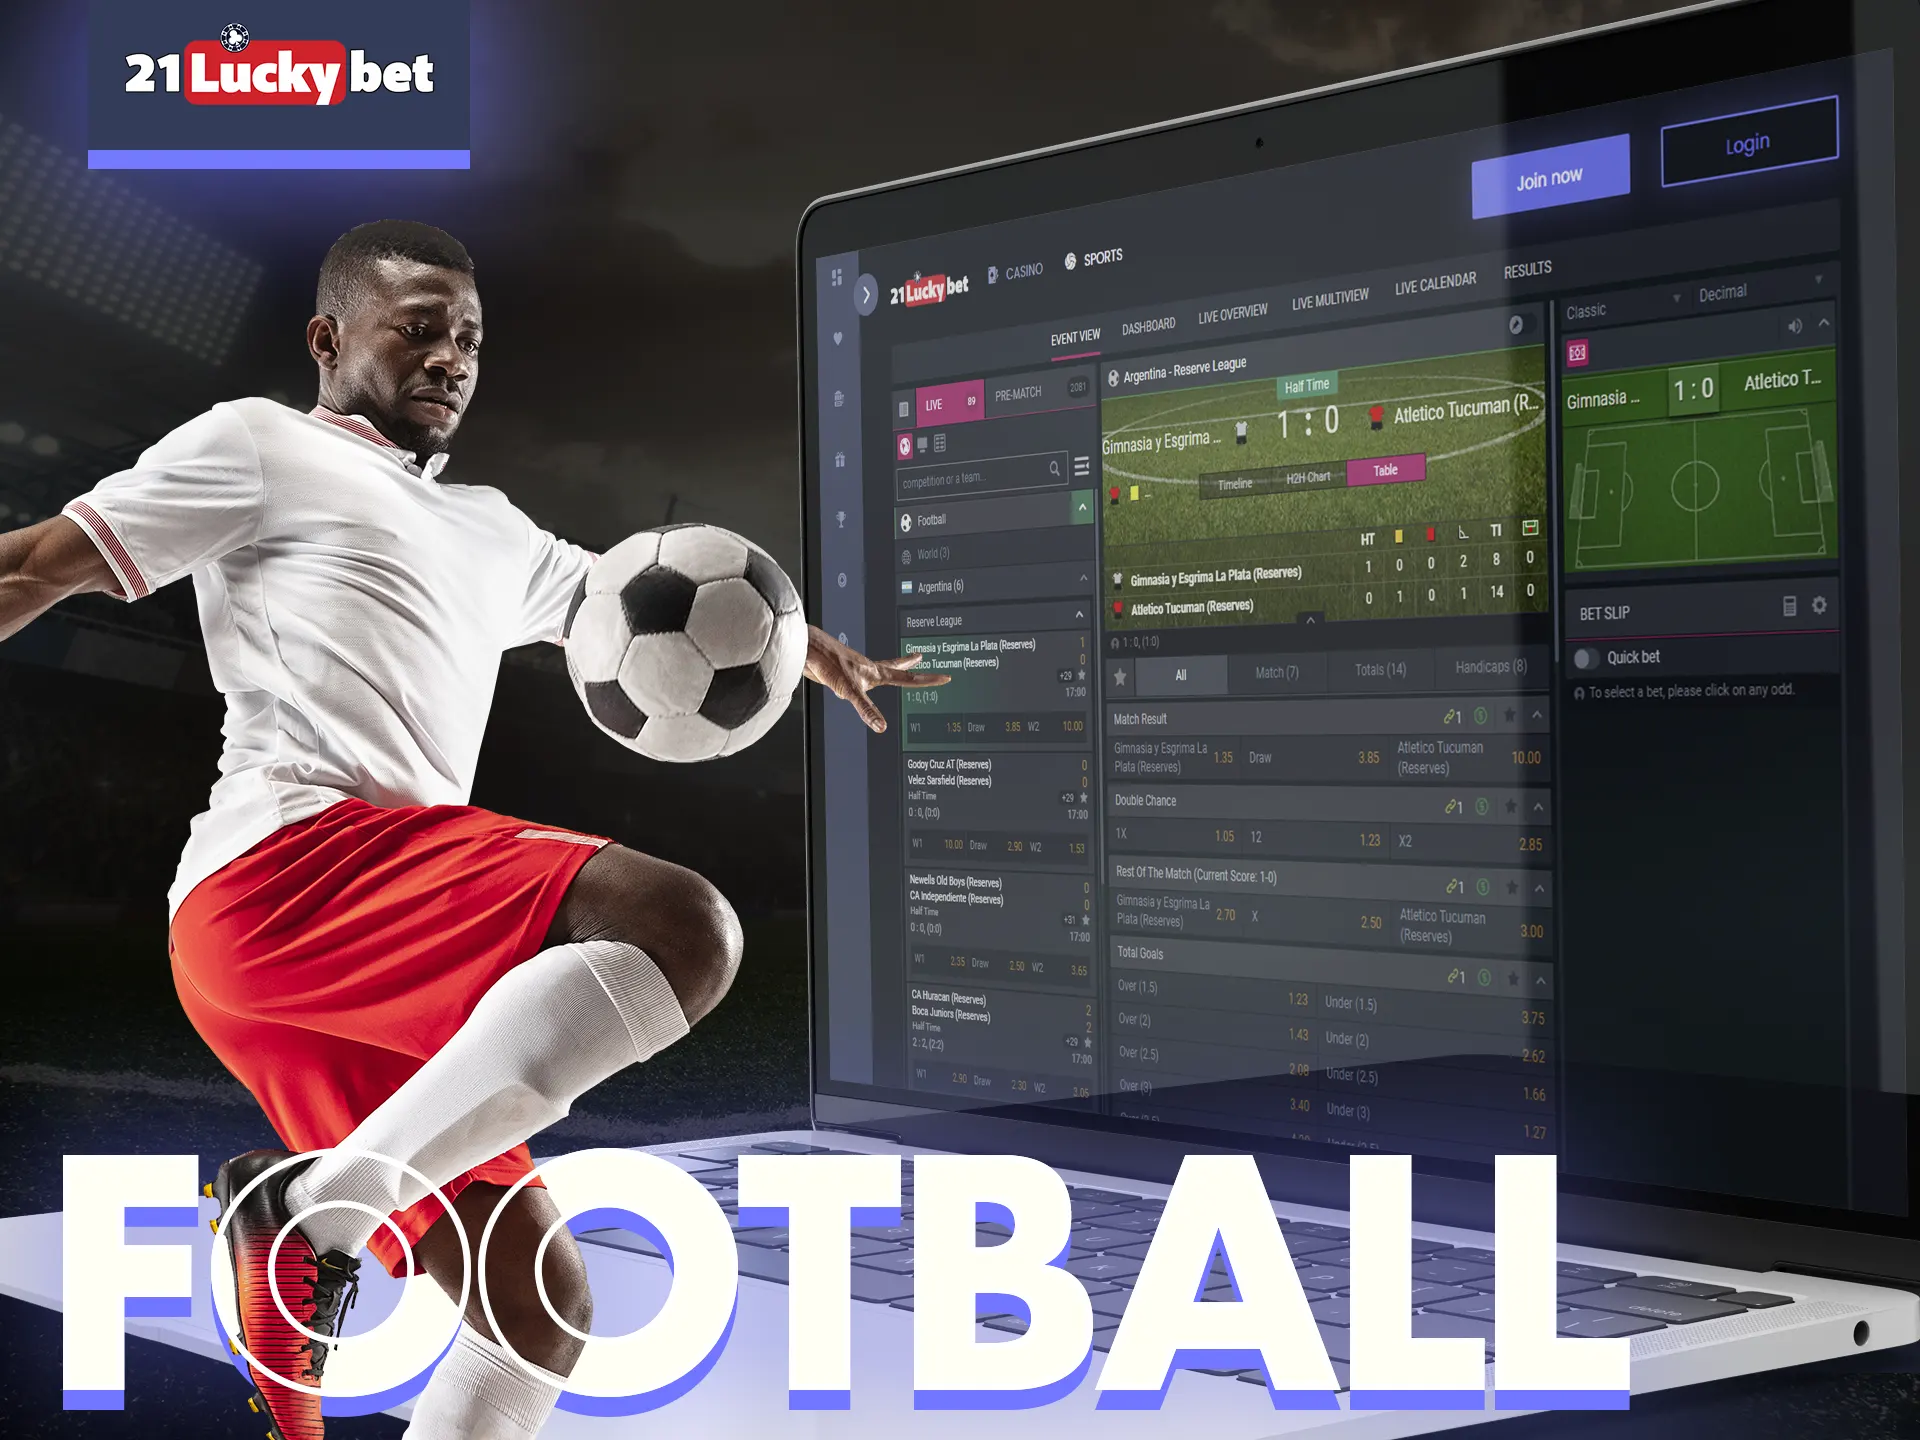 At 21luckybet football betting is available.